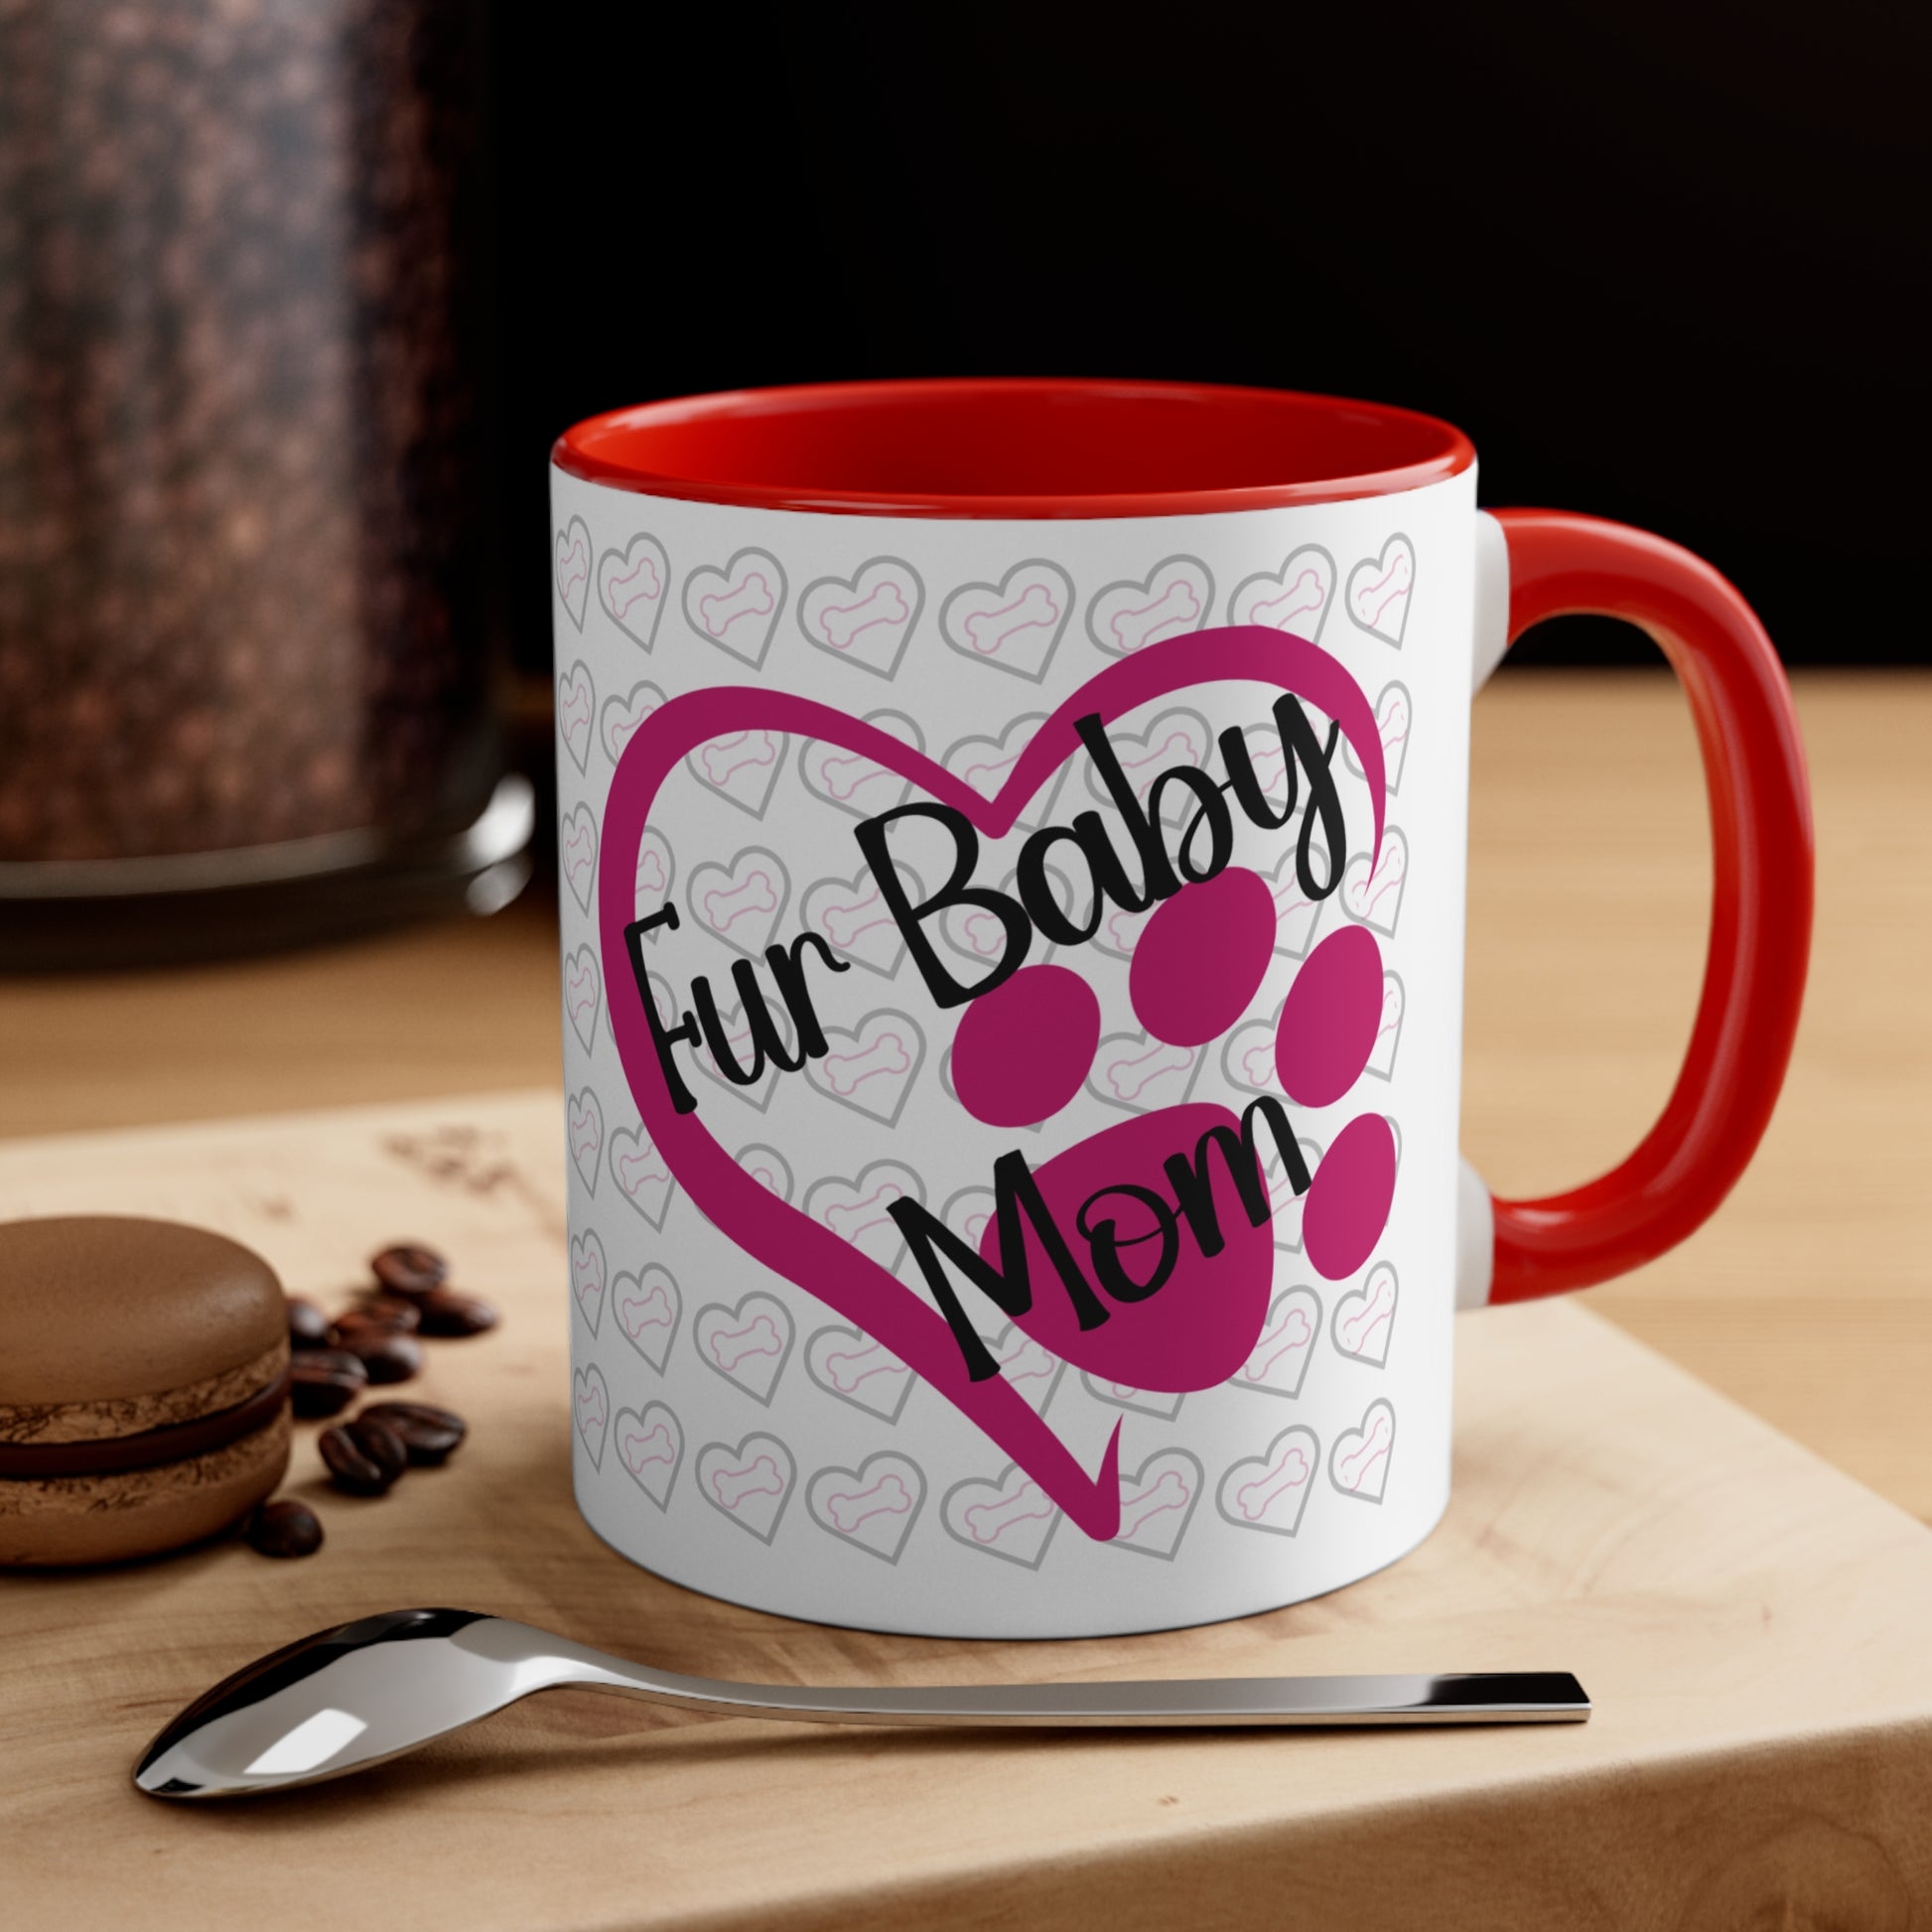 Fur baby mom coffee mug with pink heart and paw print 11 oz, front view in red.